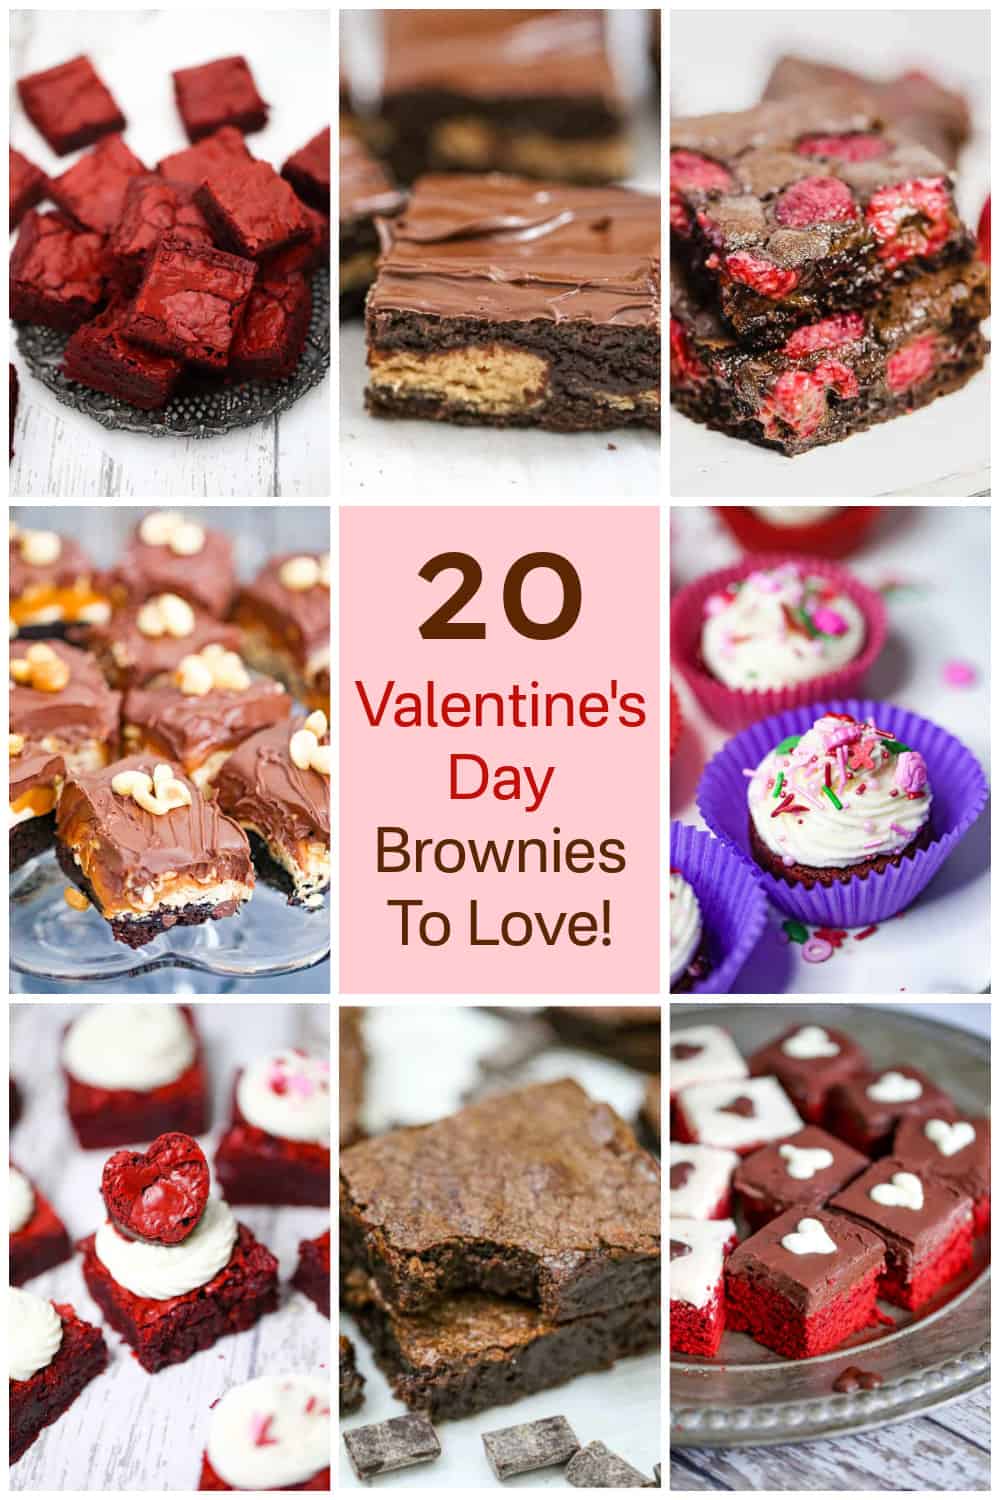 20 Valentine’s Day Brownies To Love